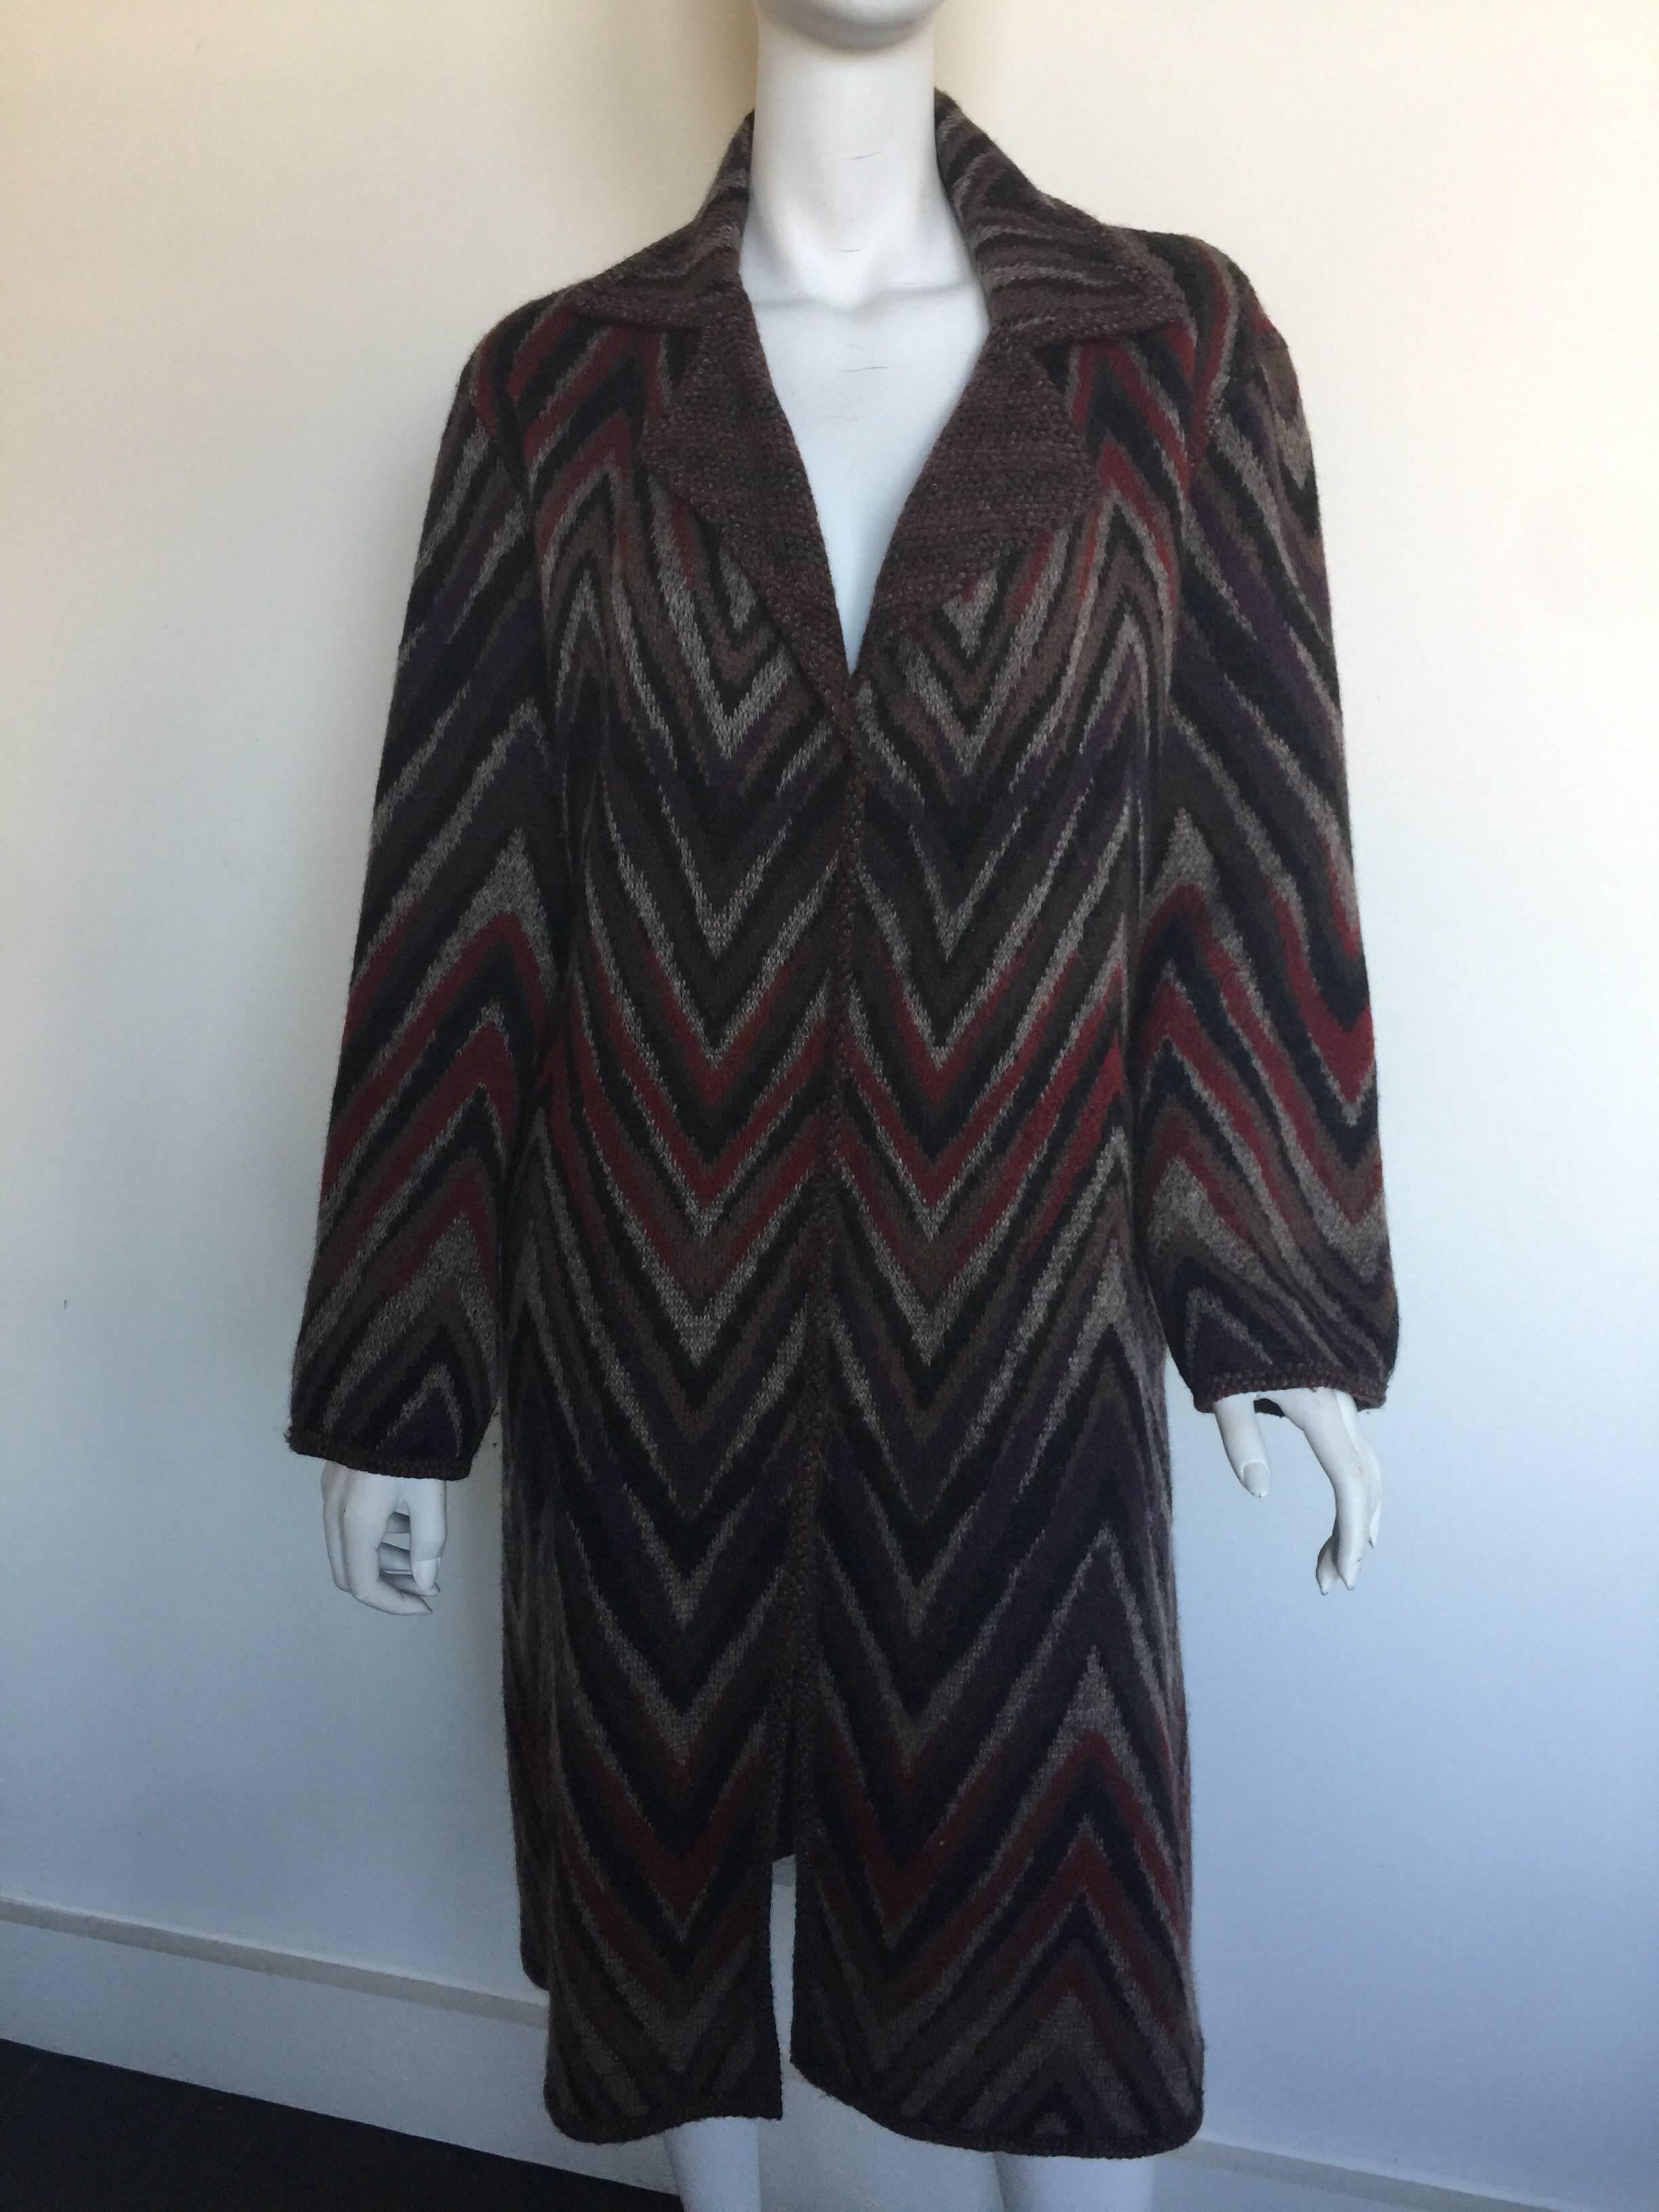 This reversible knit Missoni coat is shades of Burgundy and brown.  It has two pockets on both the outside and inside of the coat.  It is missing its tags but would fit most sizes 